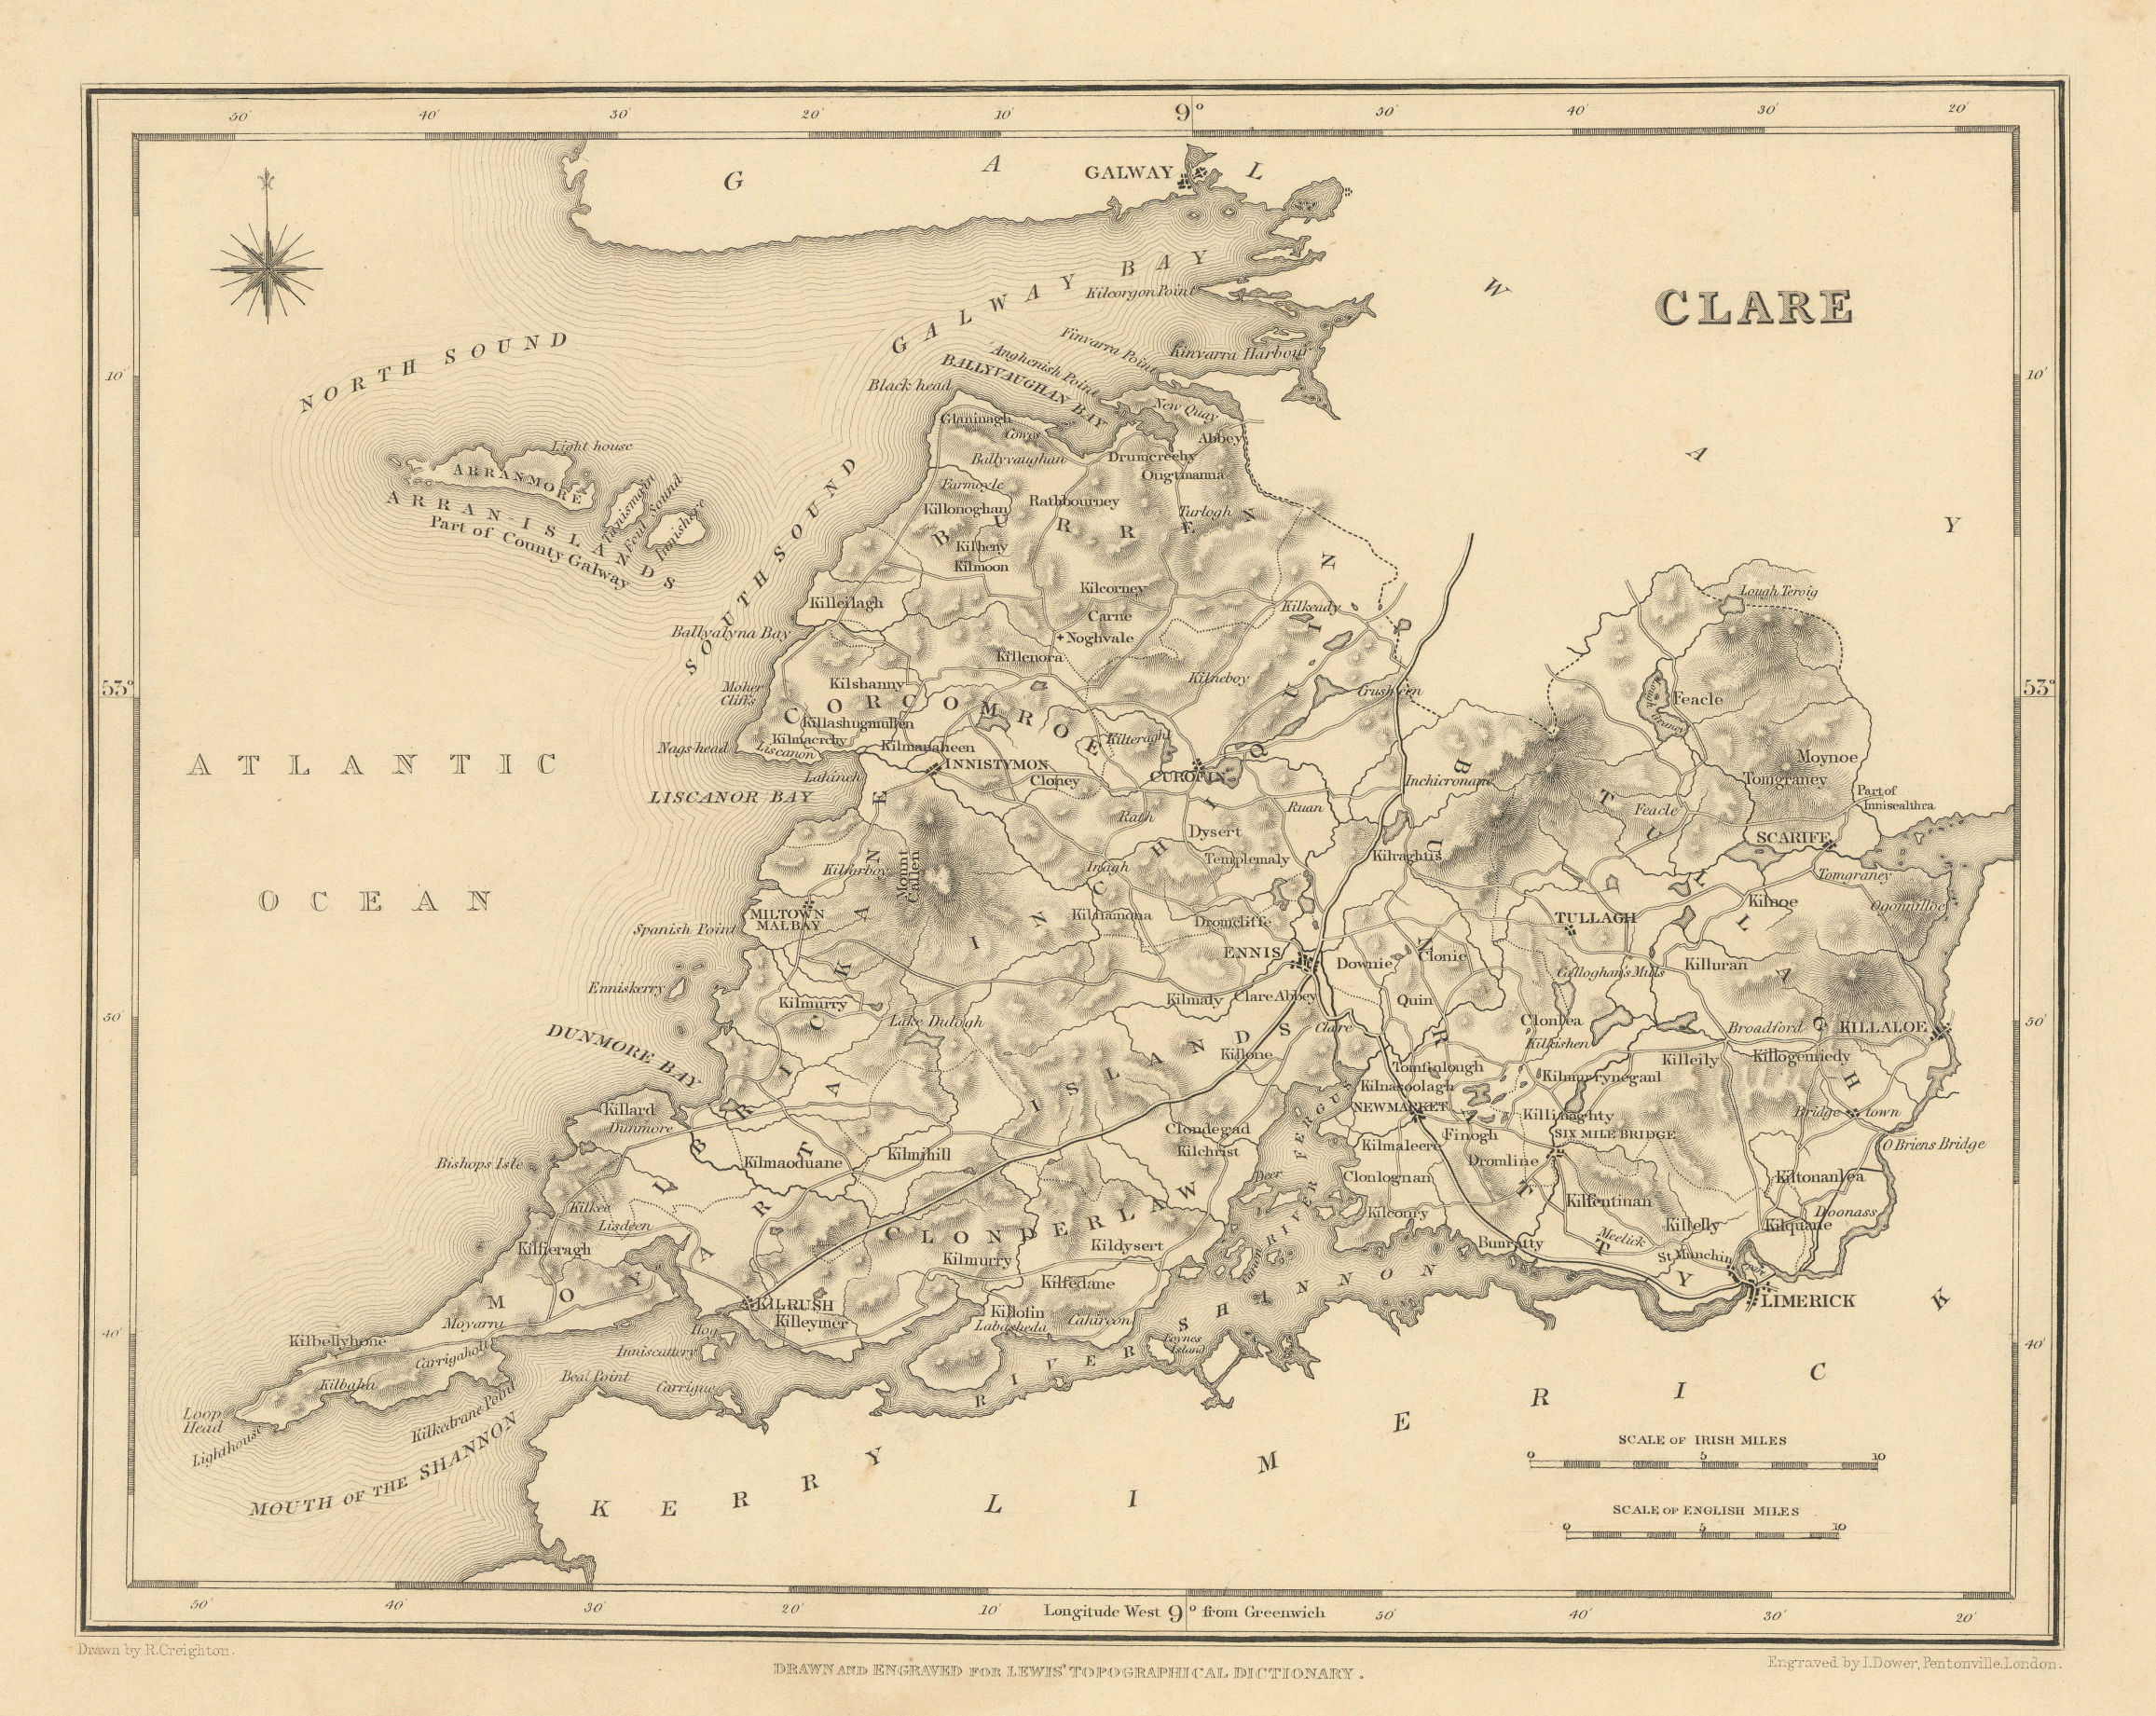 COUNTY CLARE antique map for LEWIS by CREIGHTON & DOWER - Ireland 1837 old